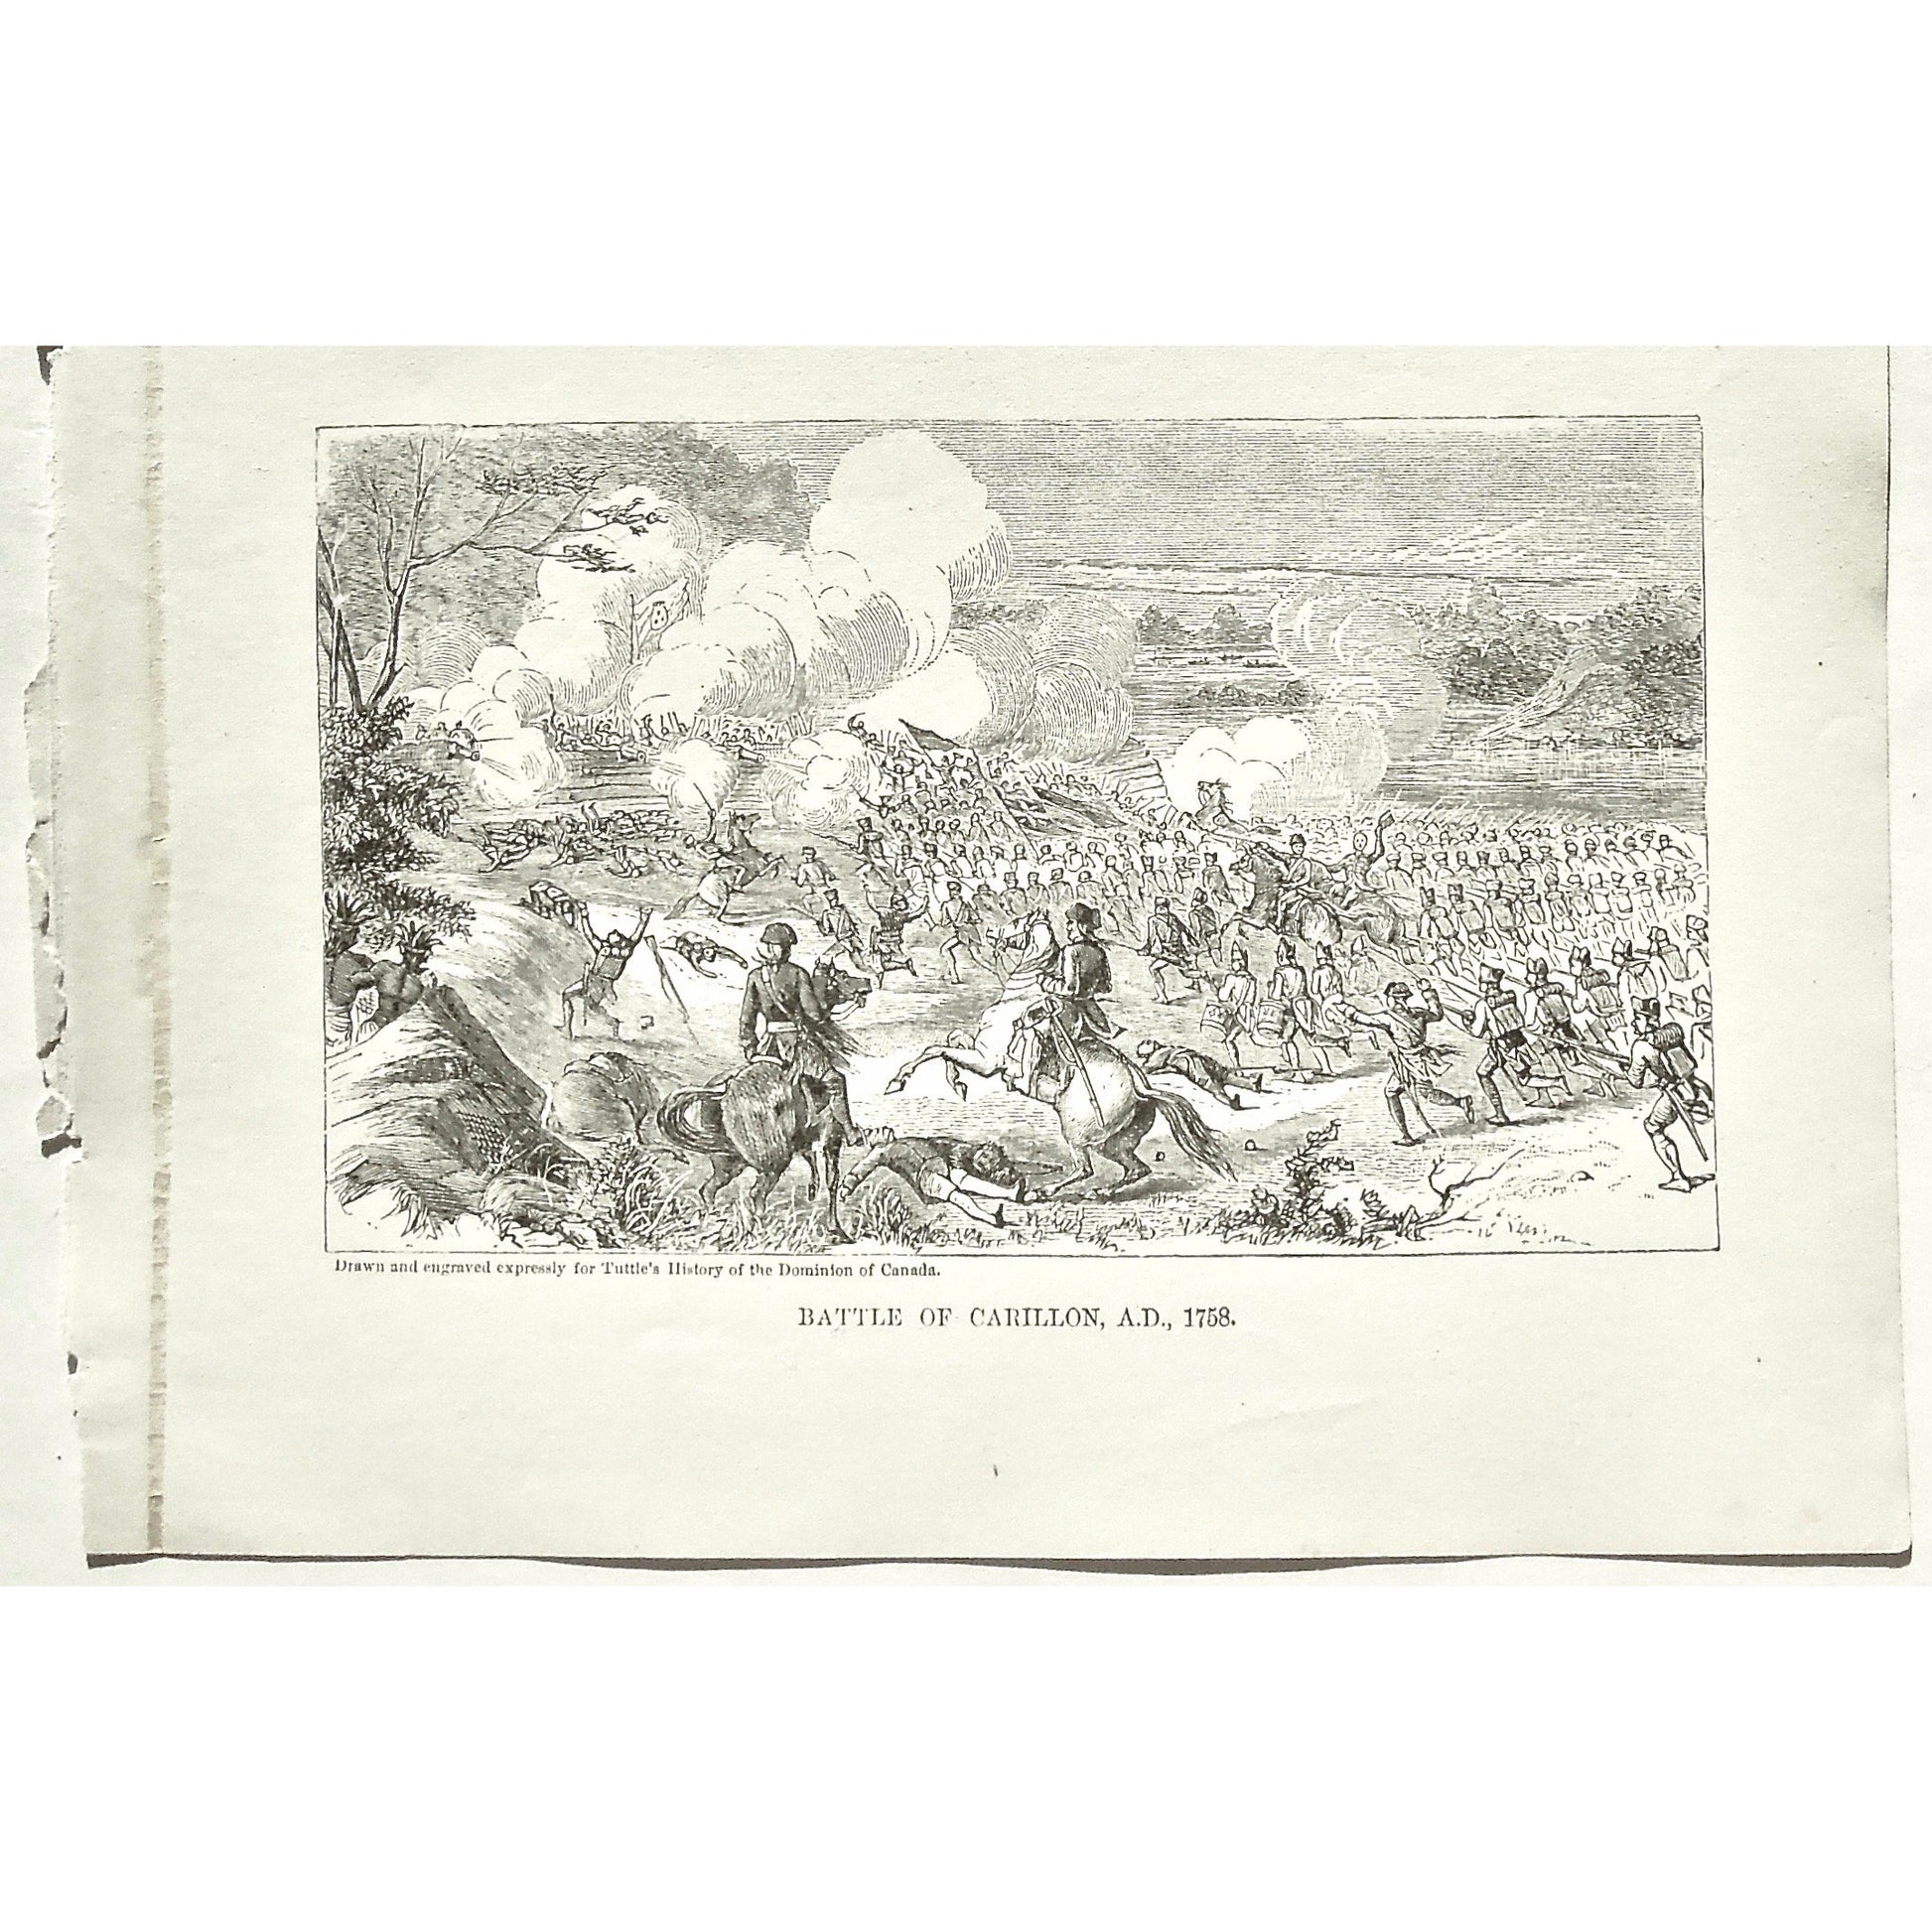 Battle of Carillon, Battle, Carillon, 1758, Battles, War, Wars, Siege, Army, Troops, Cavalry, Swords, Battle Formation, Flags, Guns, Weapons, Tuttle, Charles Tuttle, History of the Dominion, Popular History of the Dominion, Downie, Bigney, History, Dominion, Canada, Canadian History, Antique, Antique Print, Steel Engraving, Engraving, Prints, Printmaking, Original, Rare prints, rare books, Wall decor, Home decor, office art, Unique, 1877, Old Prints, Olden days, Old battles, Horseback, Going into battle, 